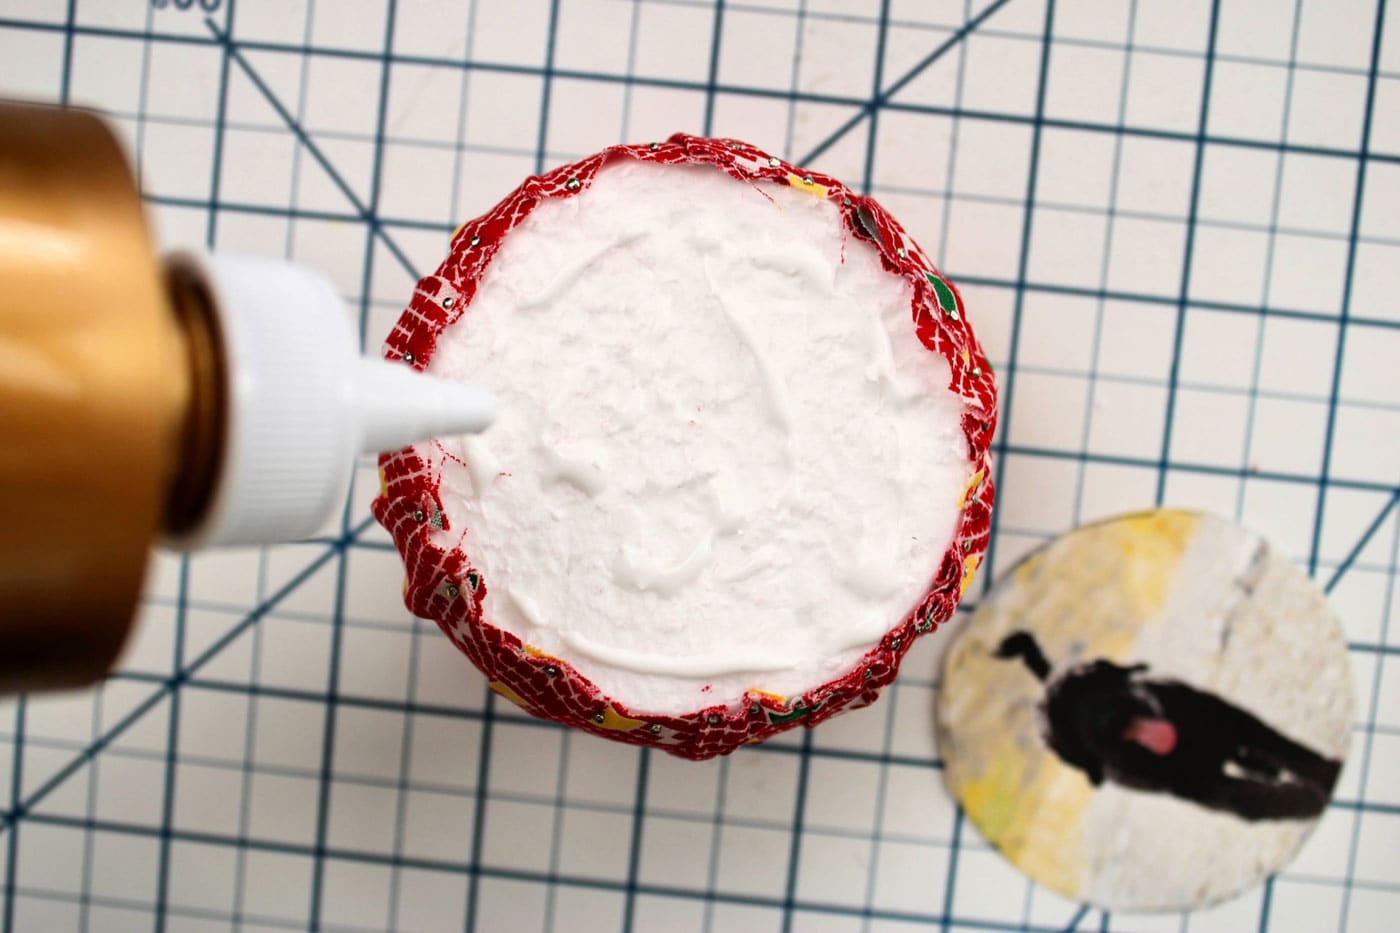 applying glue to the surface of a styrofoam ball